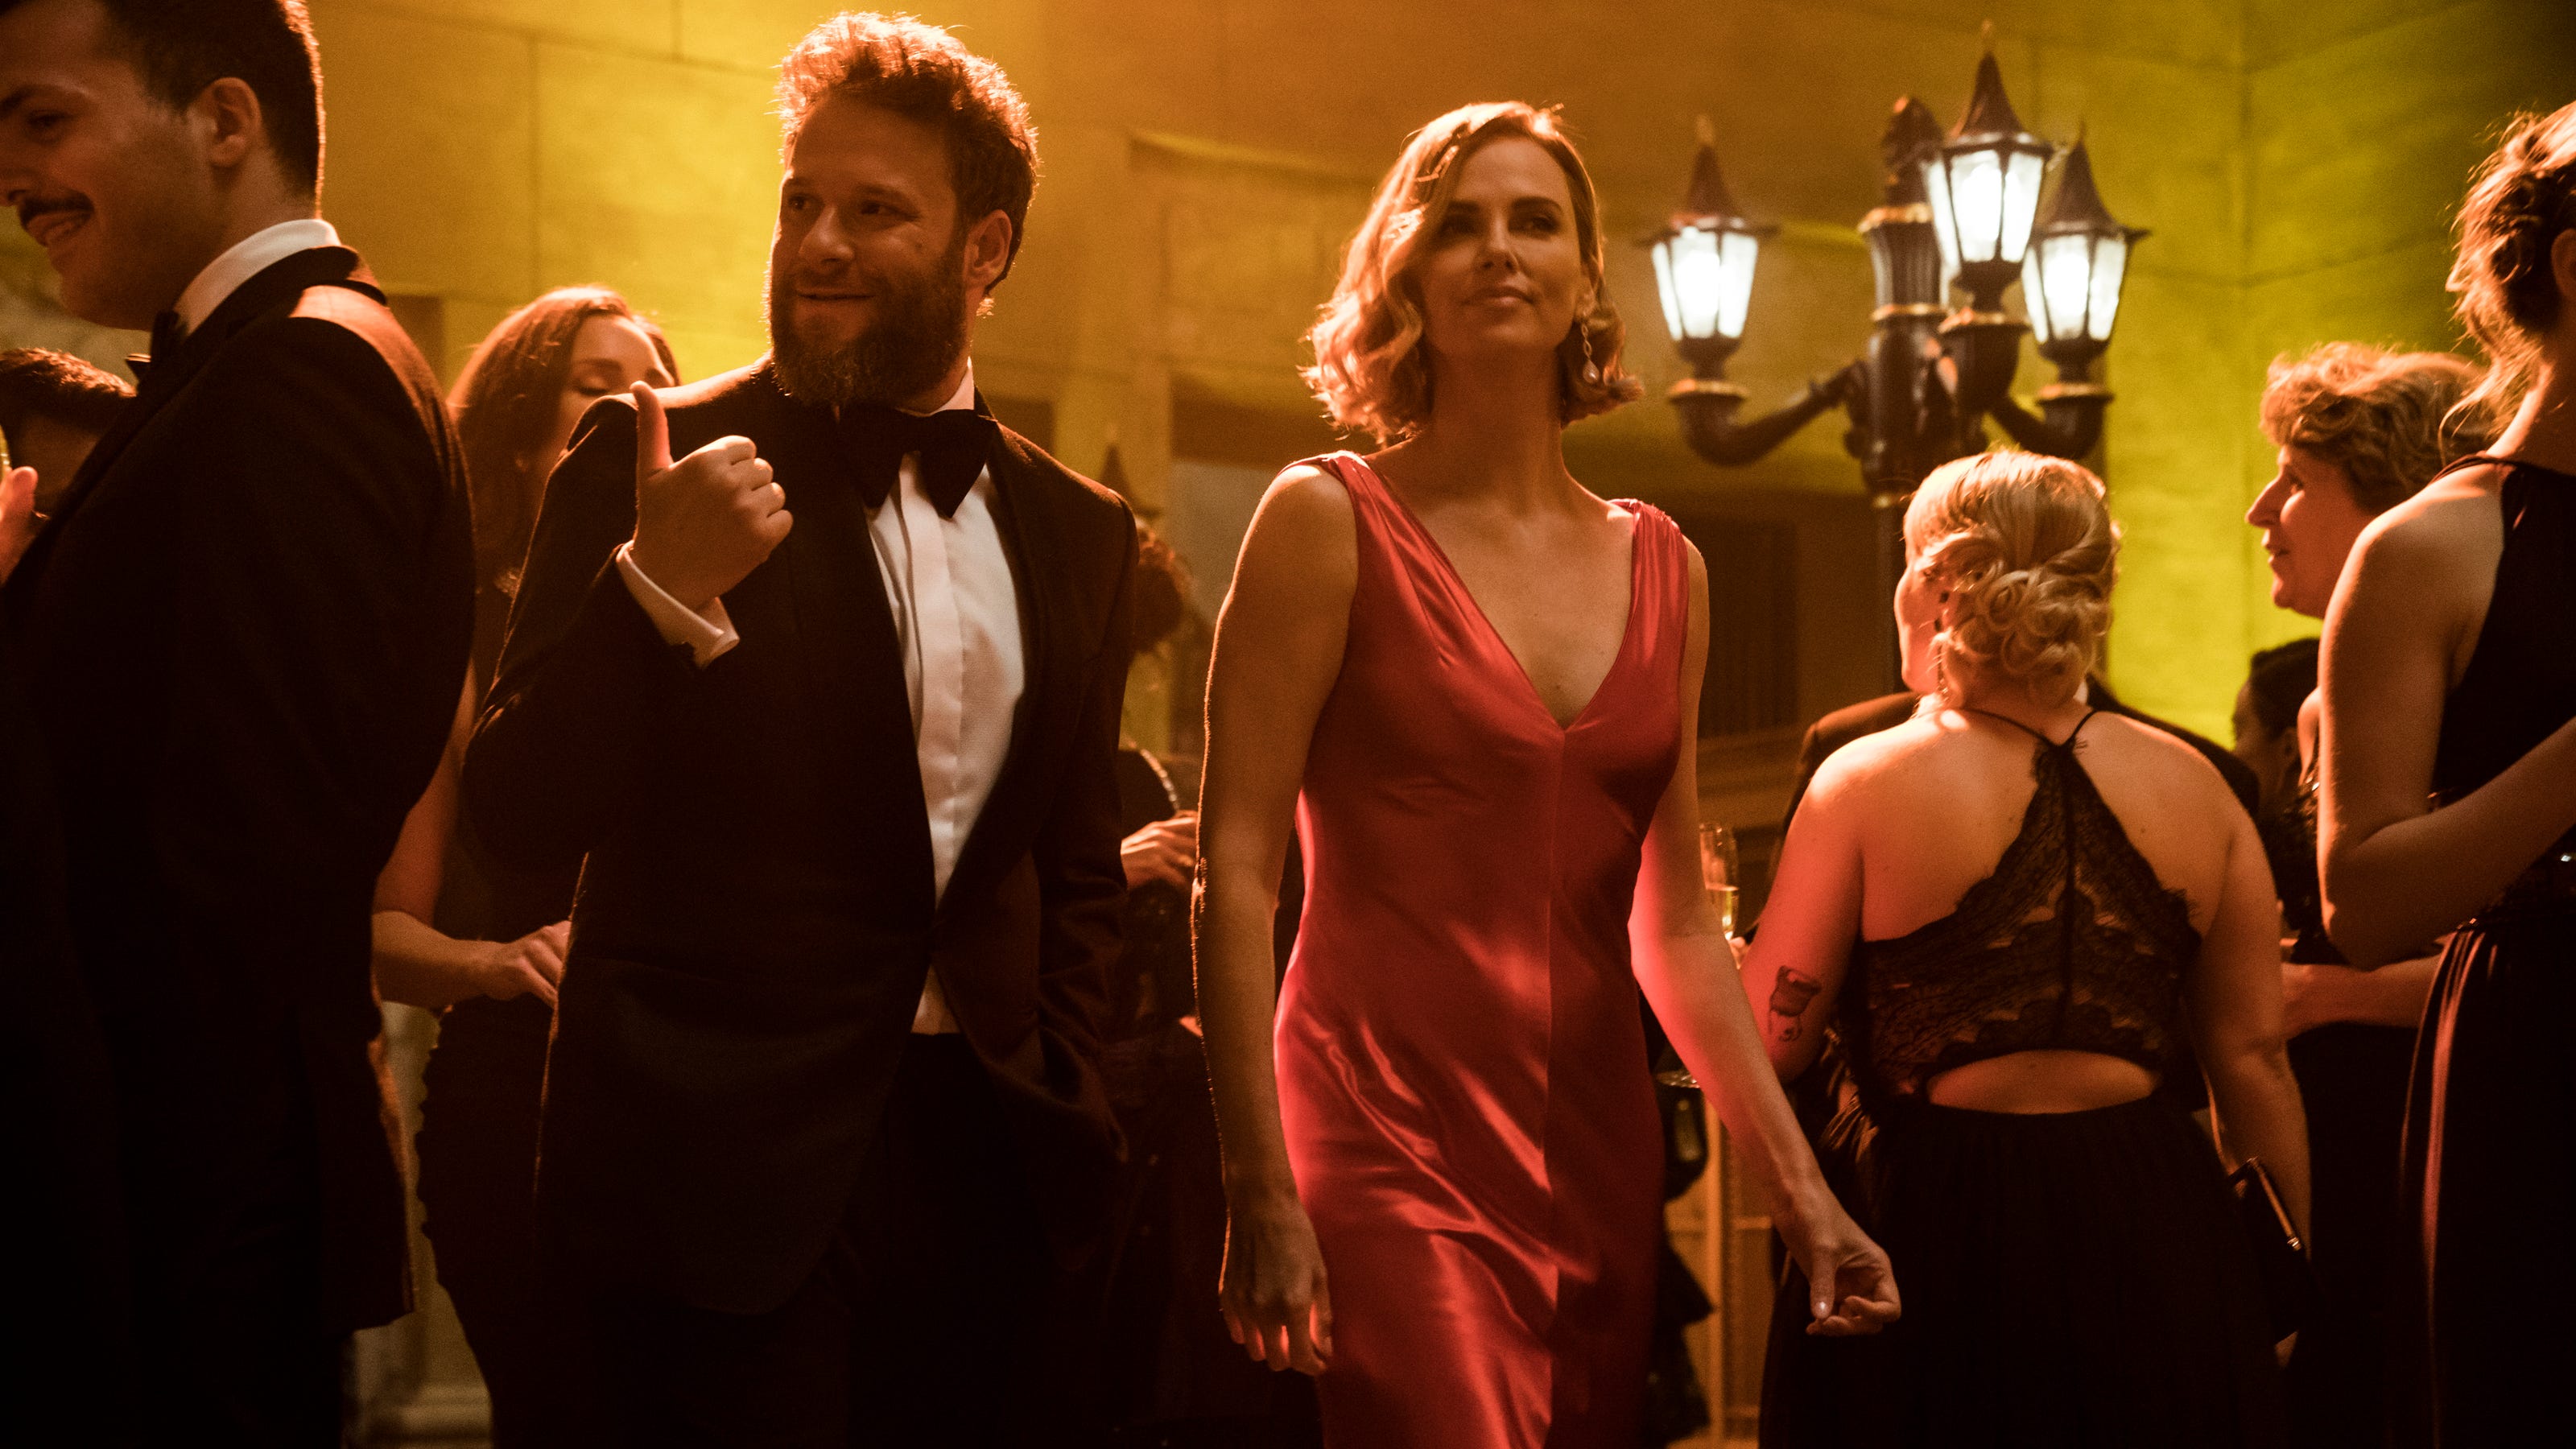 Charlize Theron - Long Shot' review: Charlize Theron, Seth Rogen endear as power couple